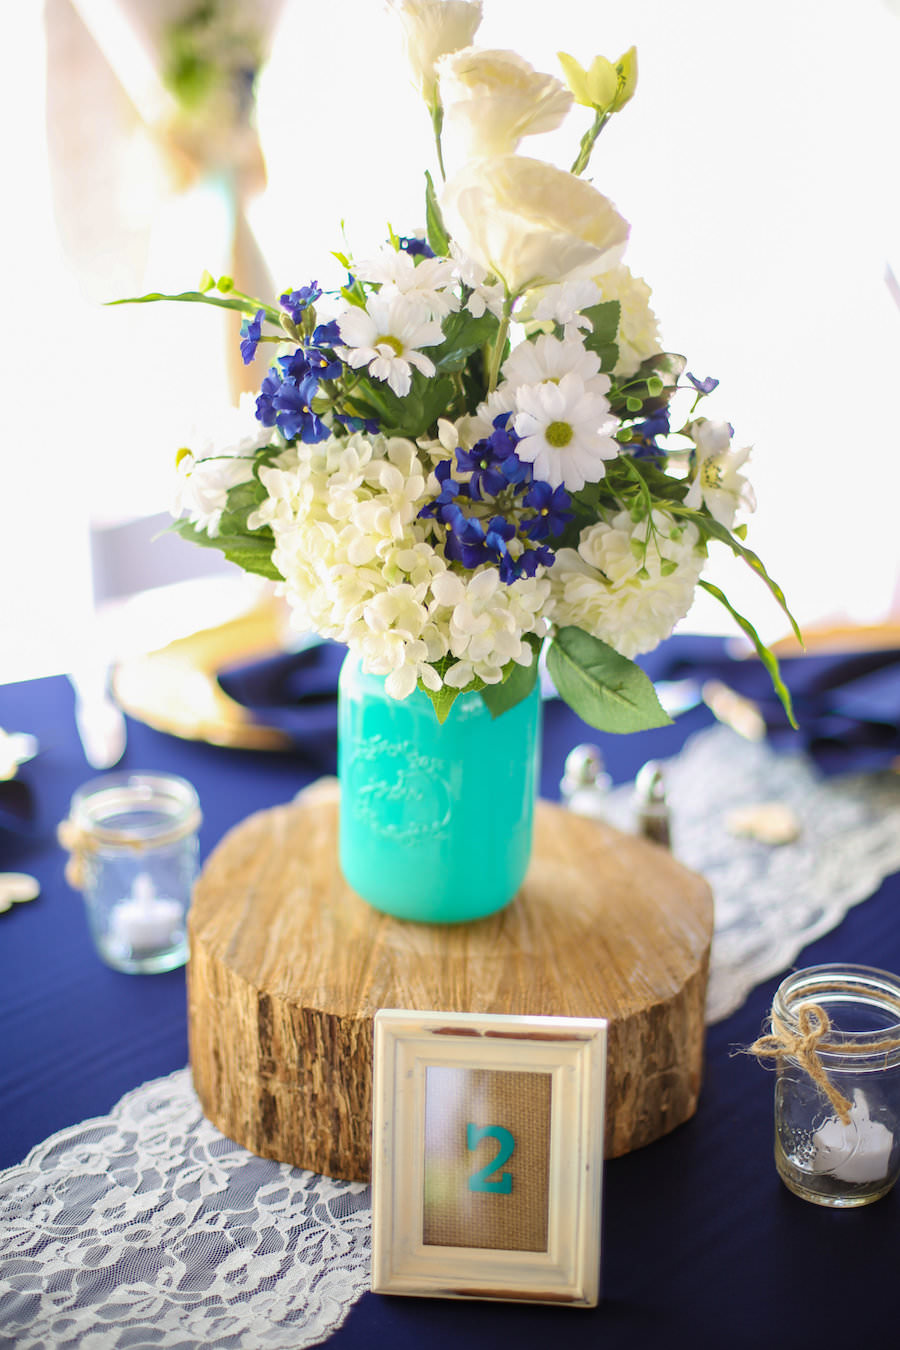 Wedding Reception Decor Details with Blue and White Floral Centerpieces, Mason Jars, and Wooden Slabs